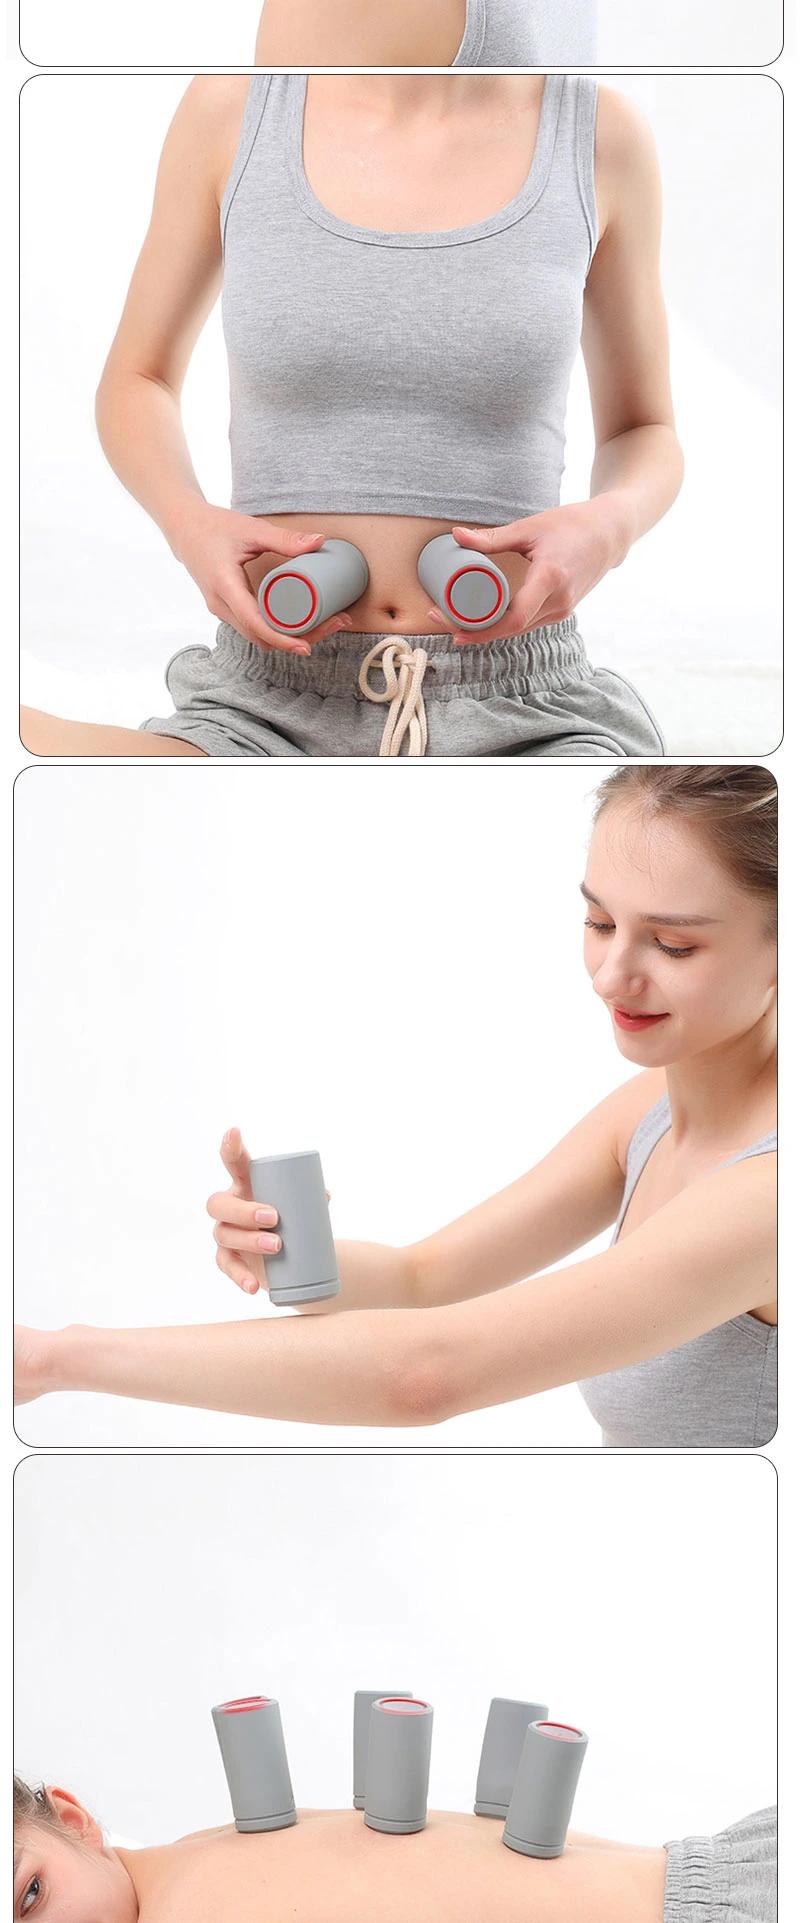 Hezheng Tes Vibration Massage EMS Micro-Current Vibration Skin-Friendly Cupping Device